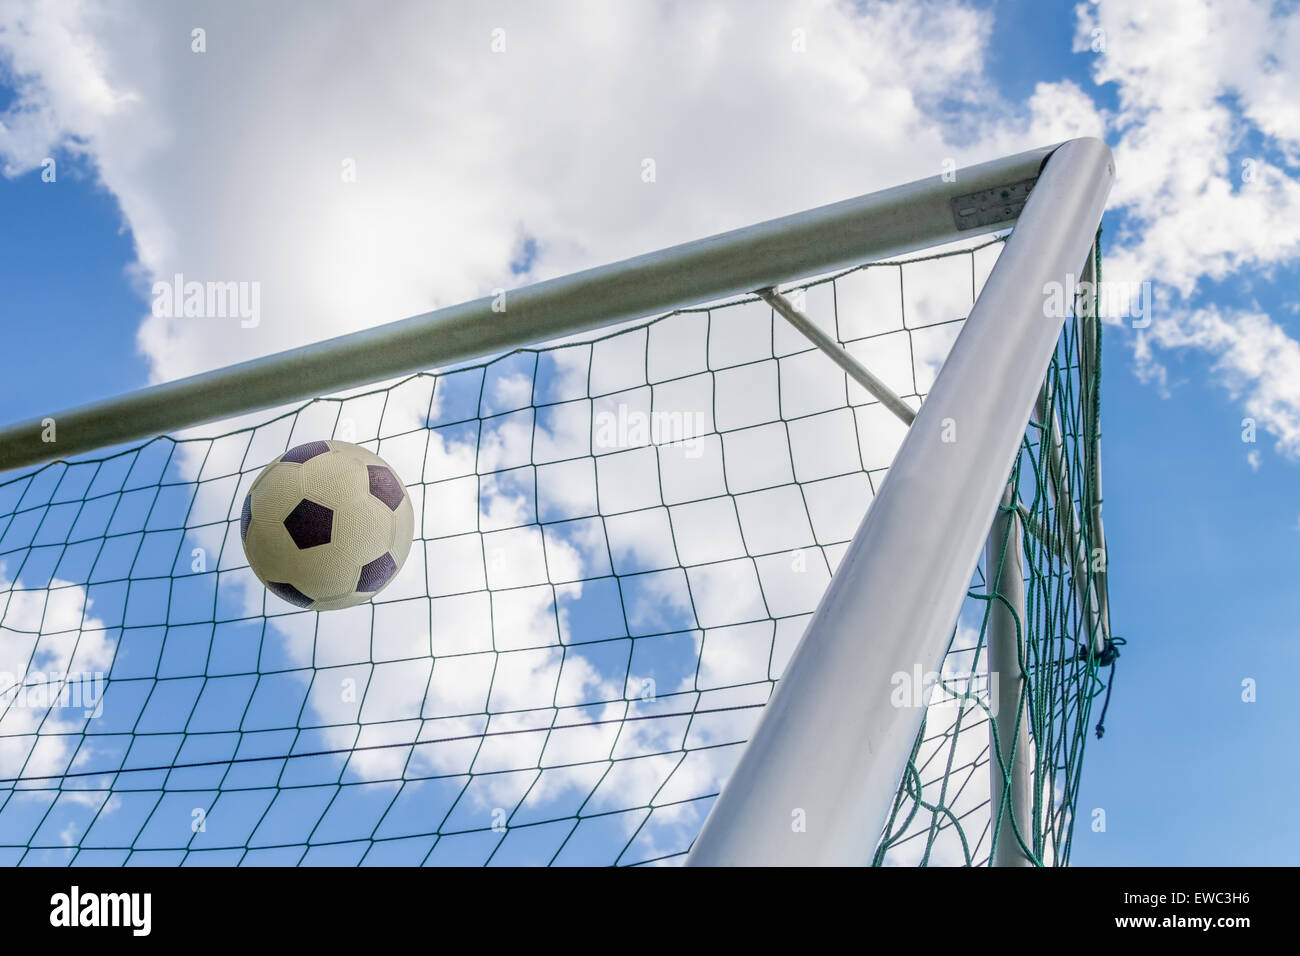 Football shot in corner of goal with blue sky and white clouds Stock Photo